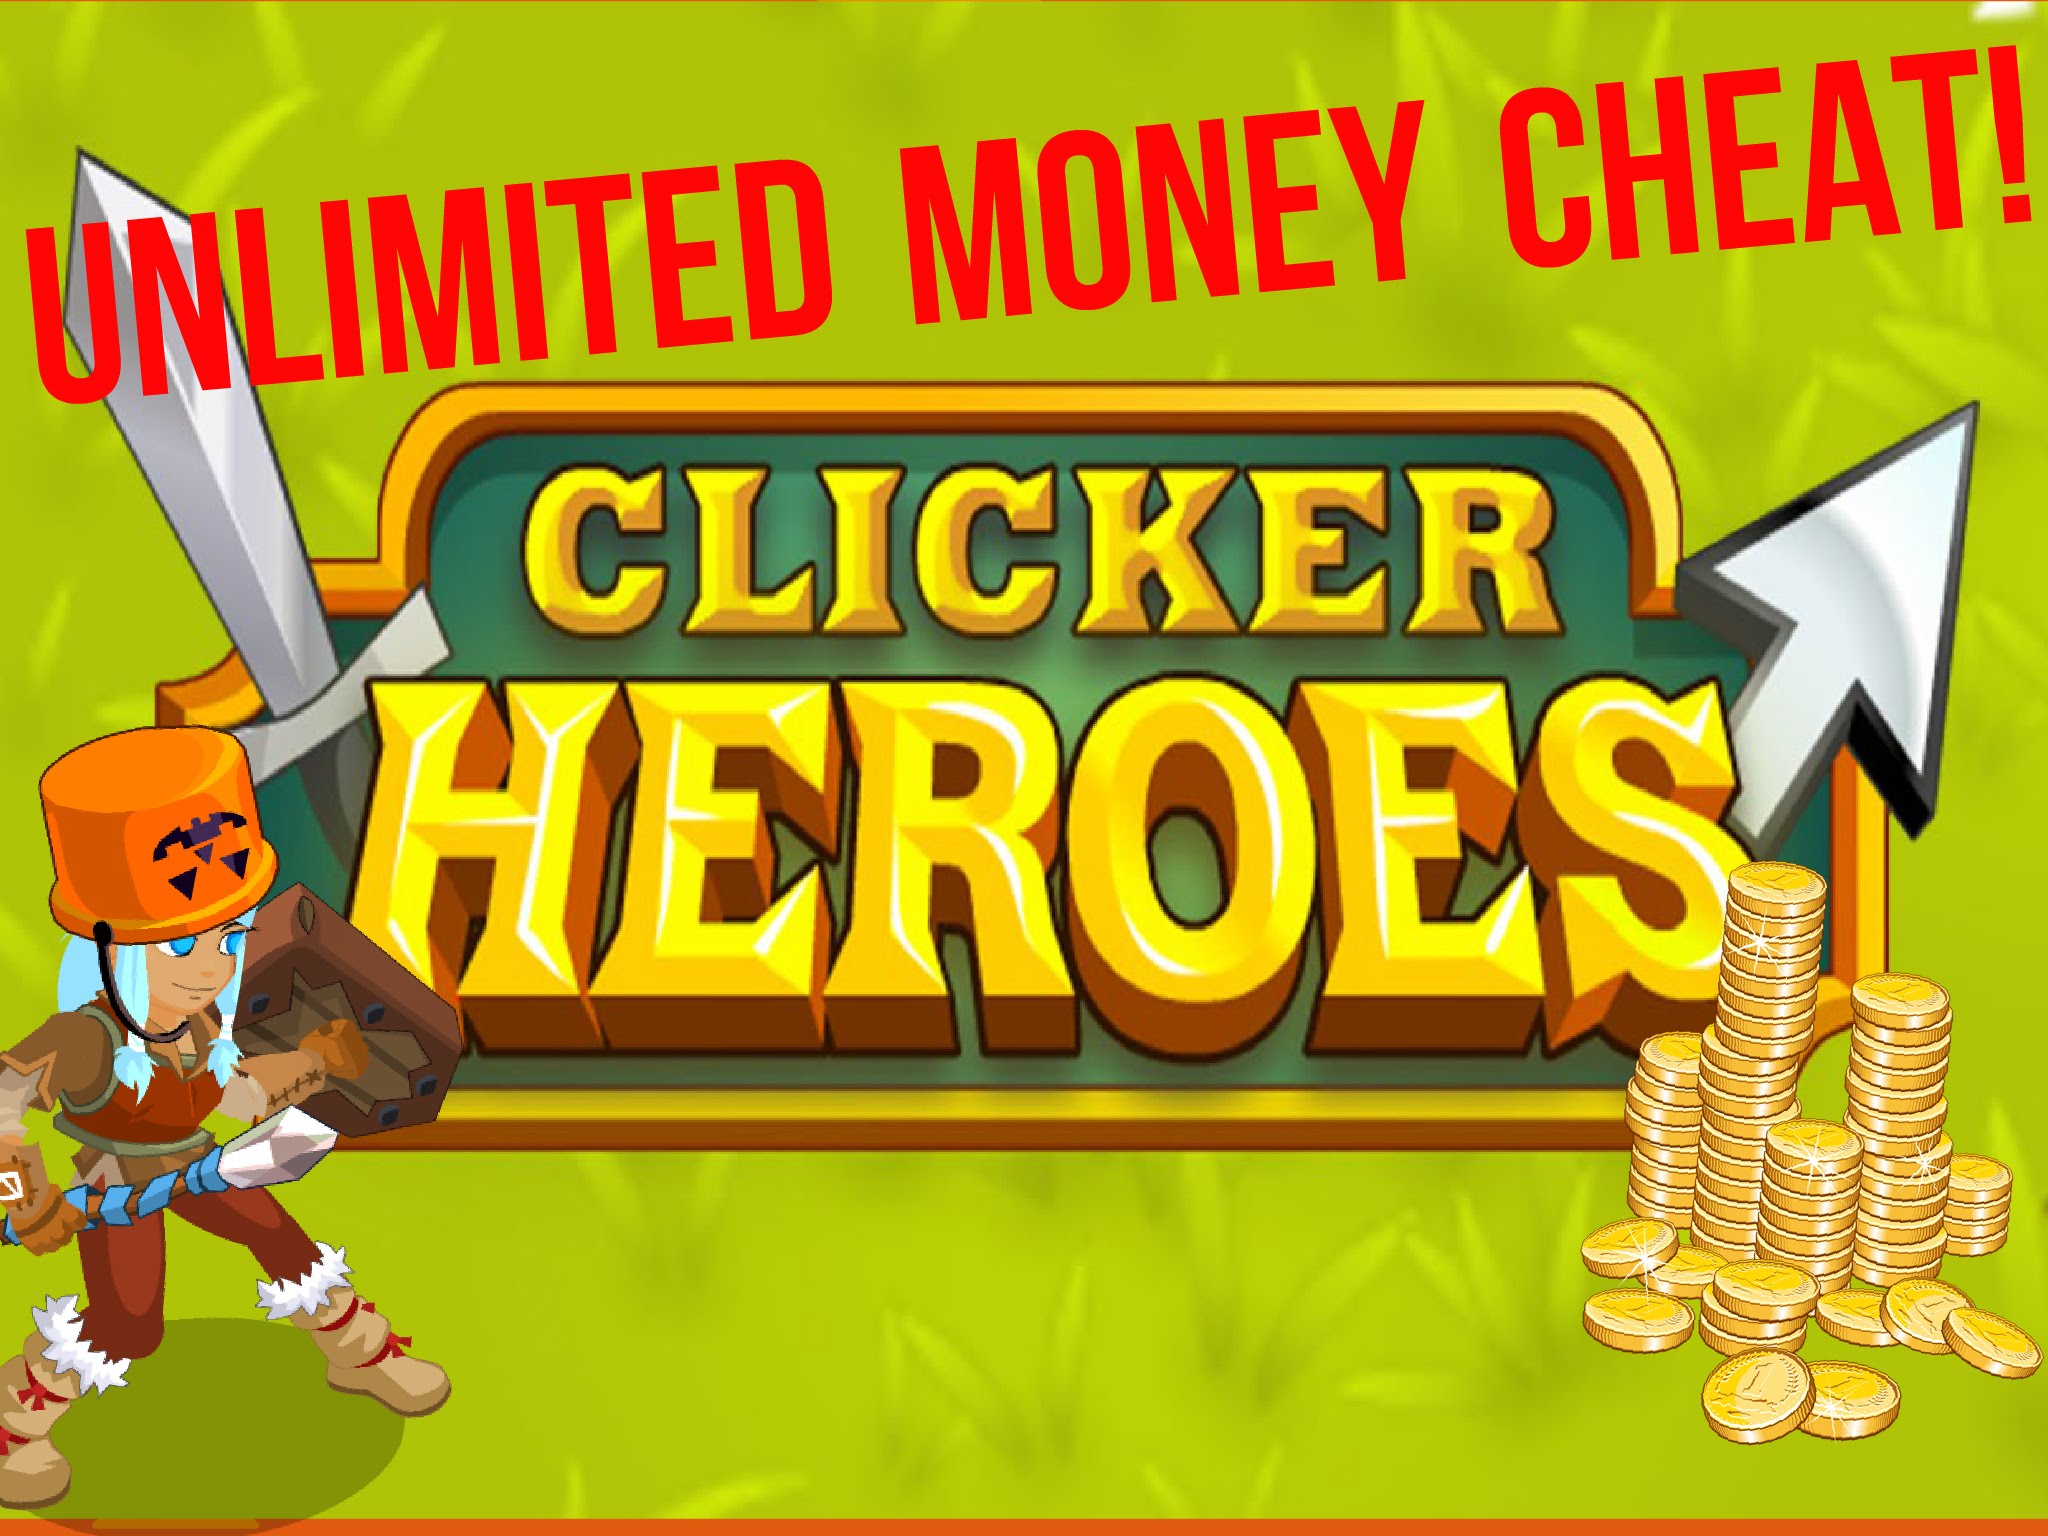 Video Game Clicker Heroes HD Wallpapers. 